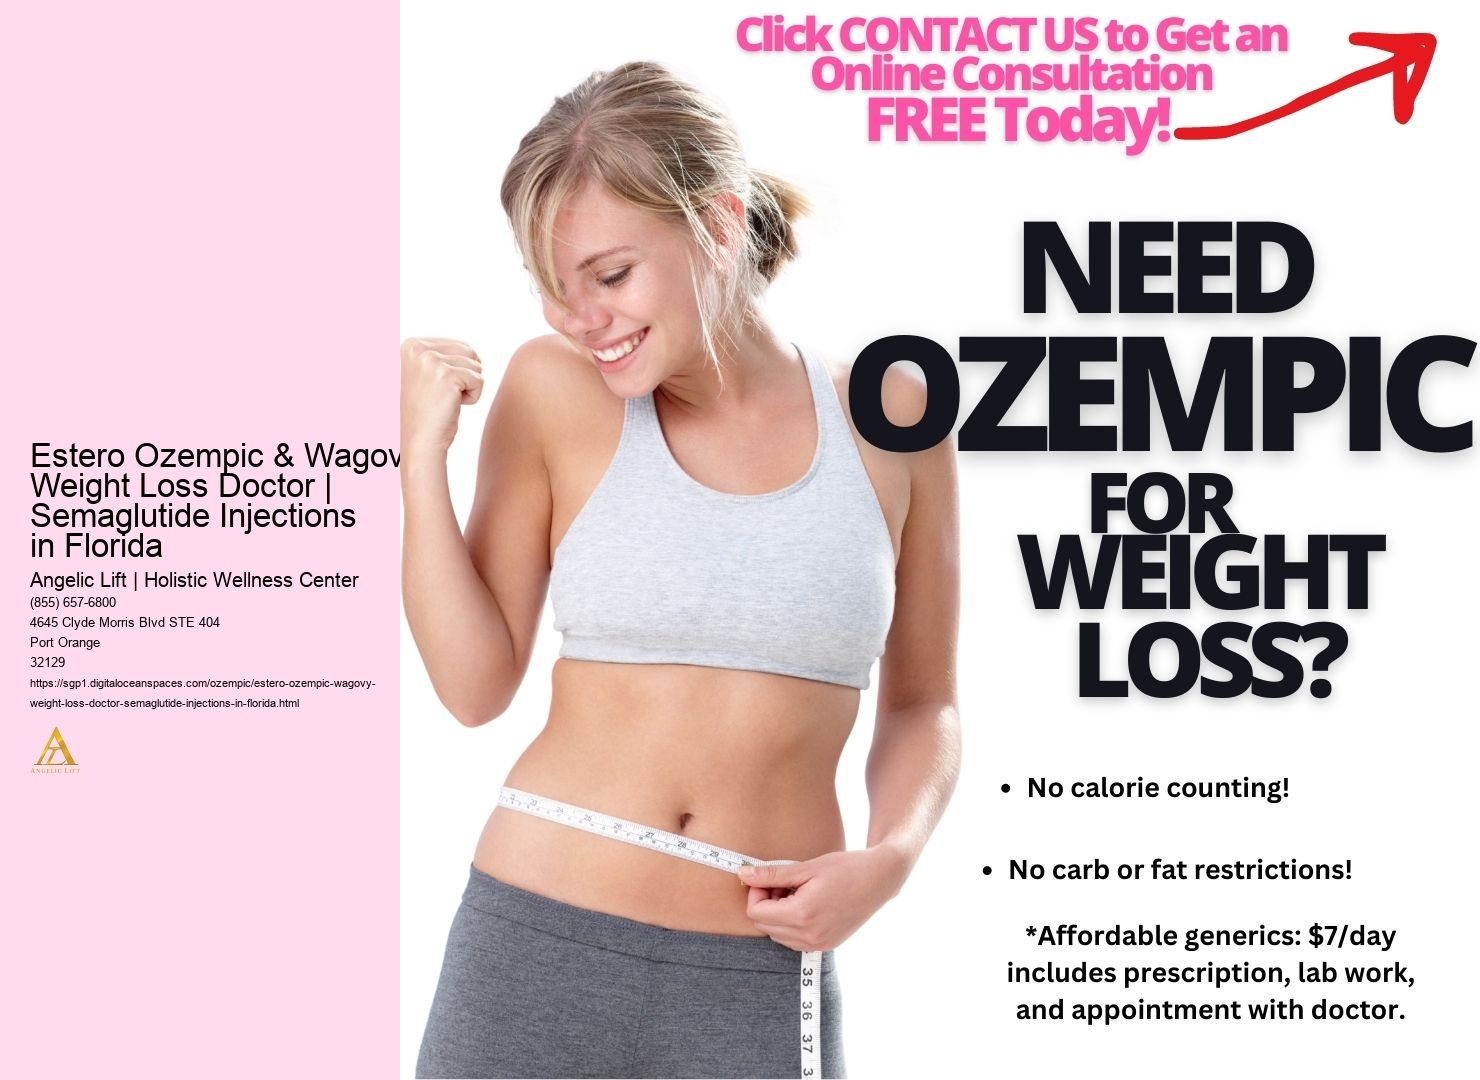 Estero Ozempic & Wagovy Weight Loss Doctor | Semaglutide Injections in Florida